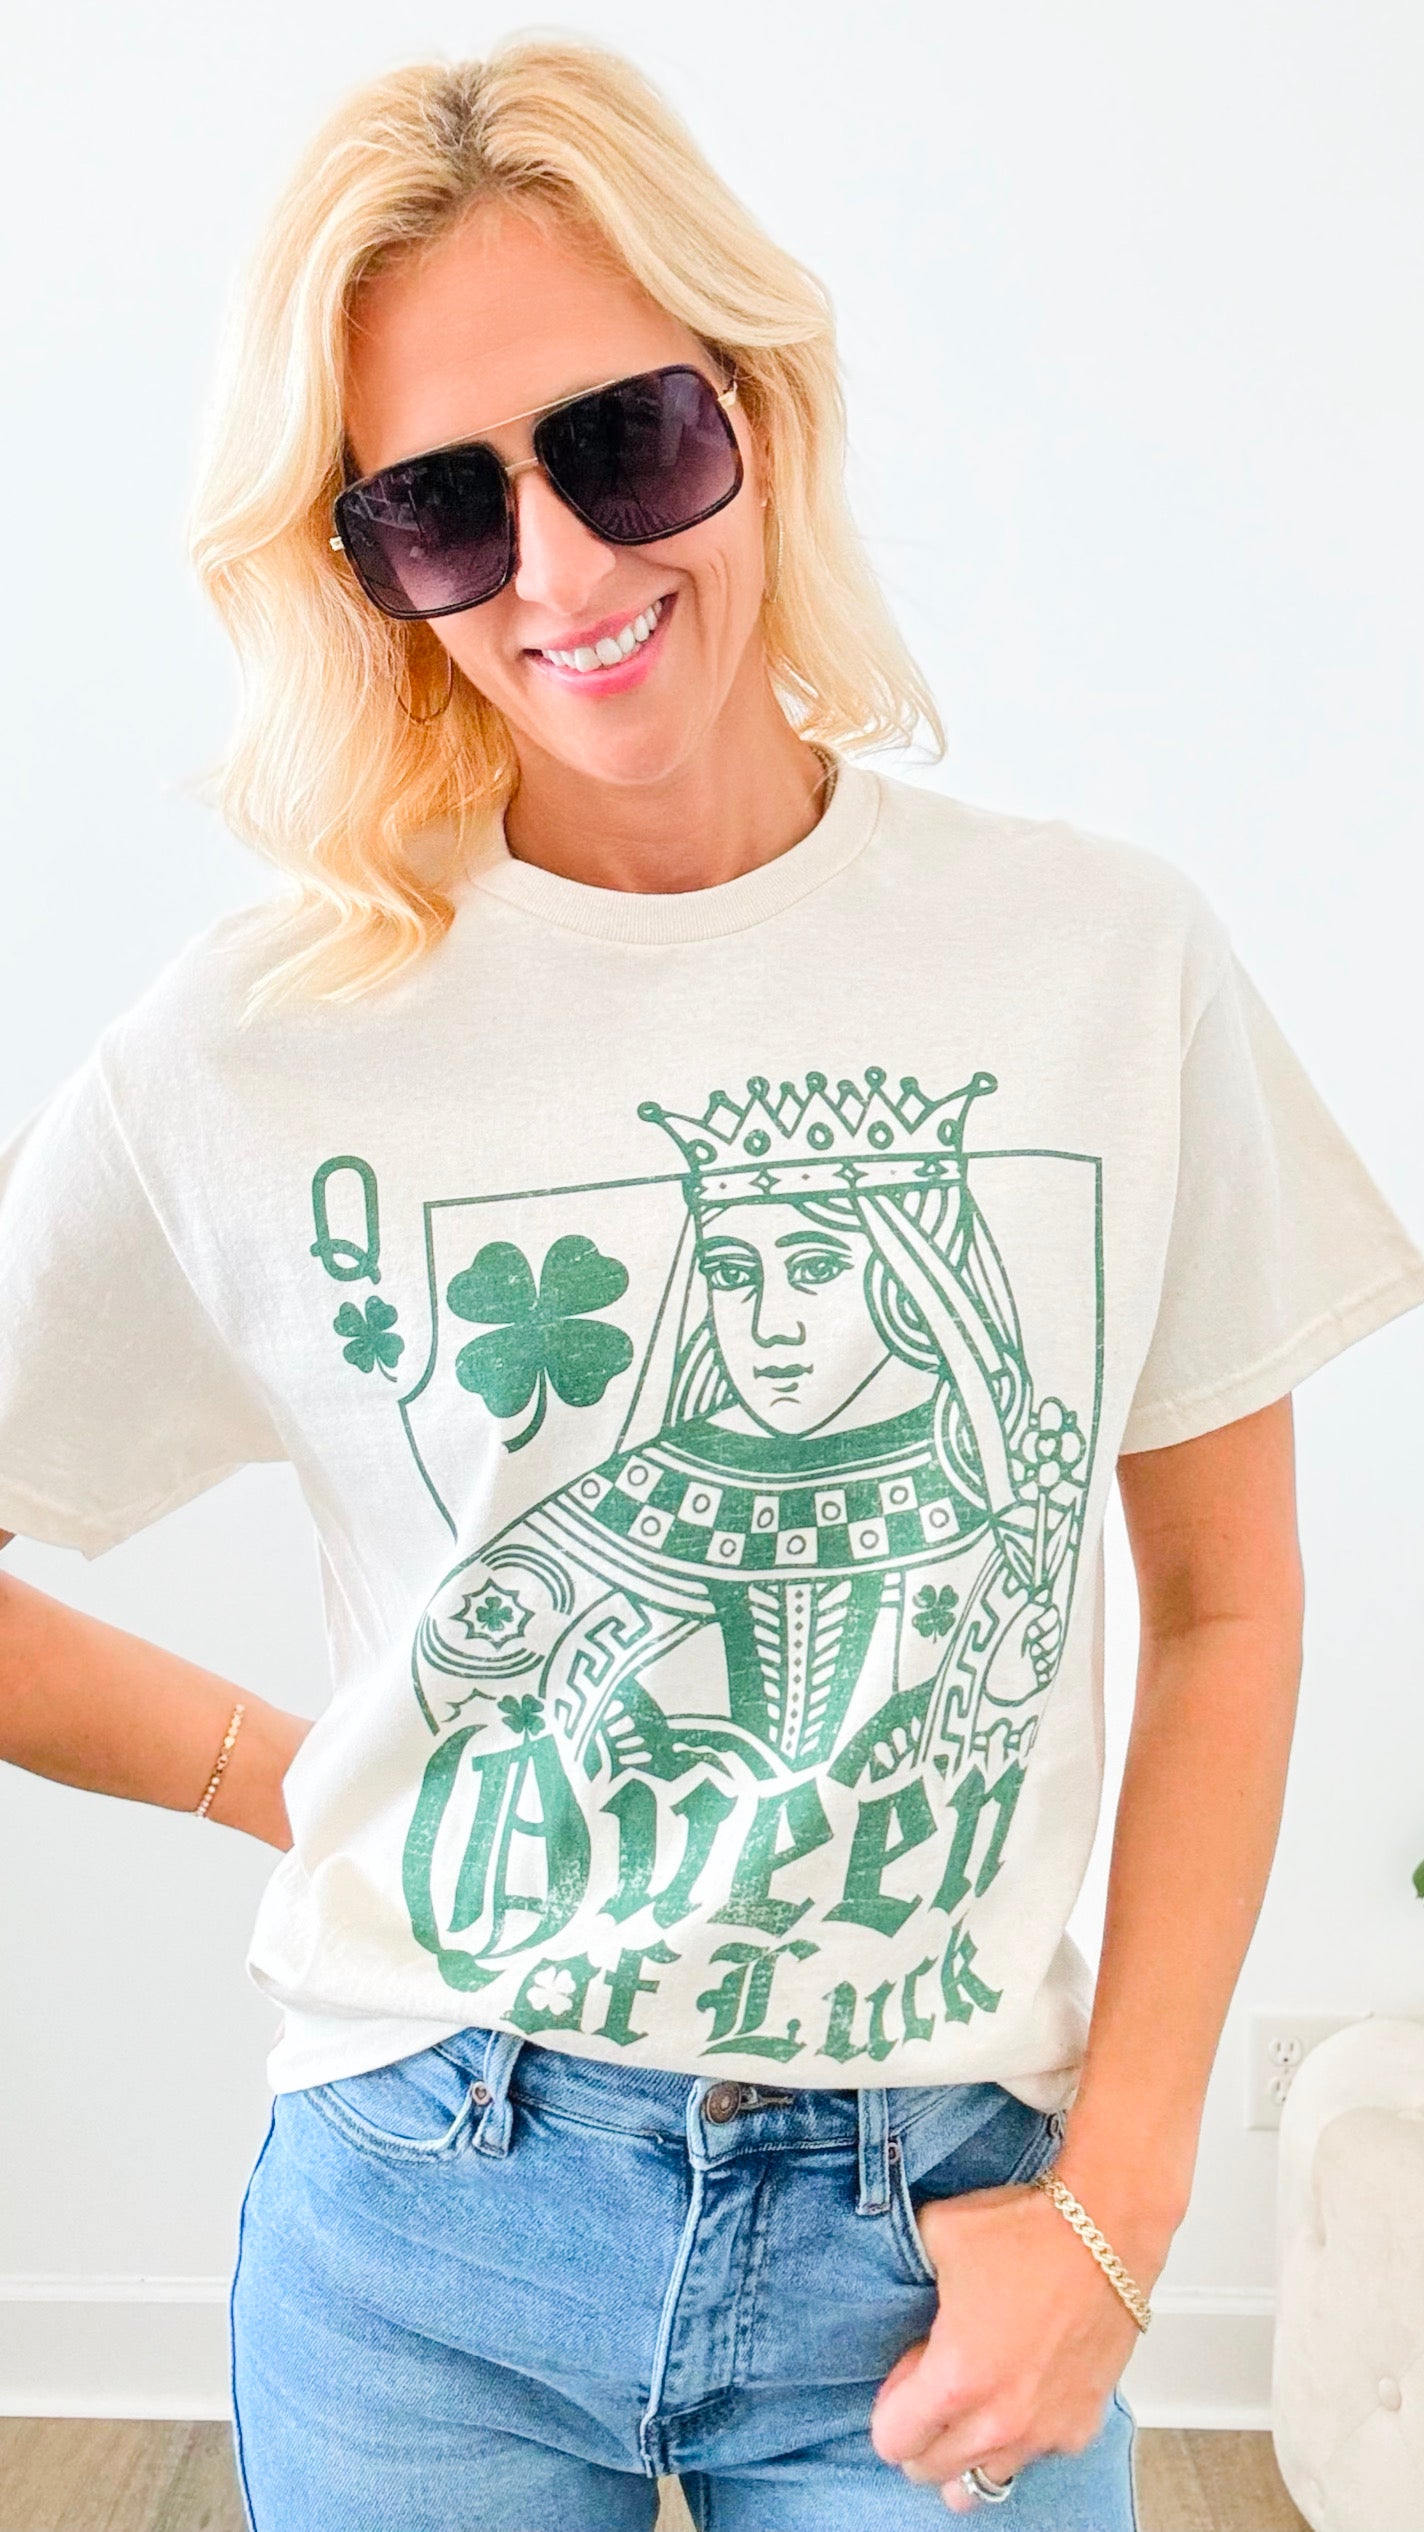 Queen of Luck Graphic Tee Shirt-120 Graphic-WKNDER-Coastal Bloom Boutique, find the trendiest versions of the popular styles and looks Located in Indialantic, FL